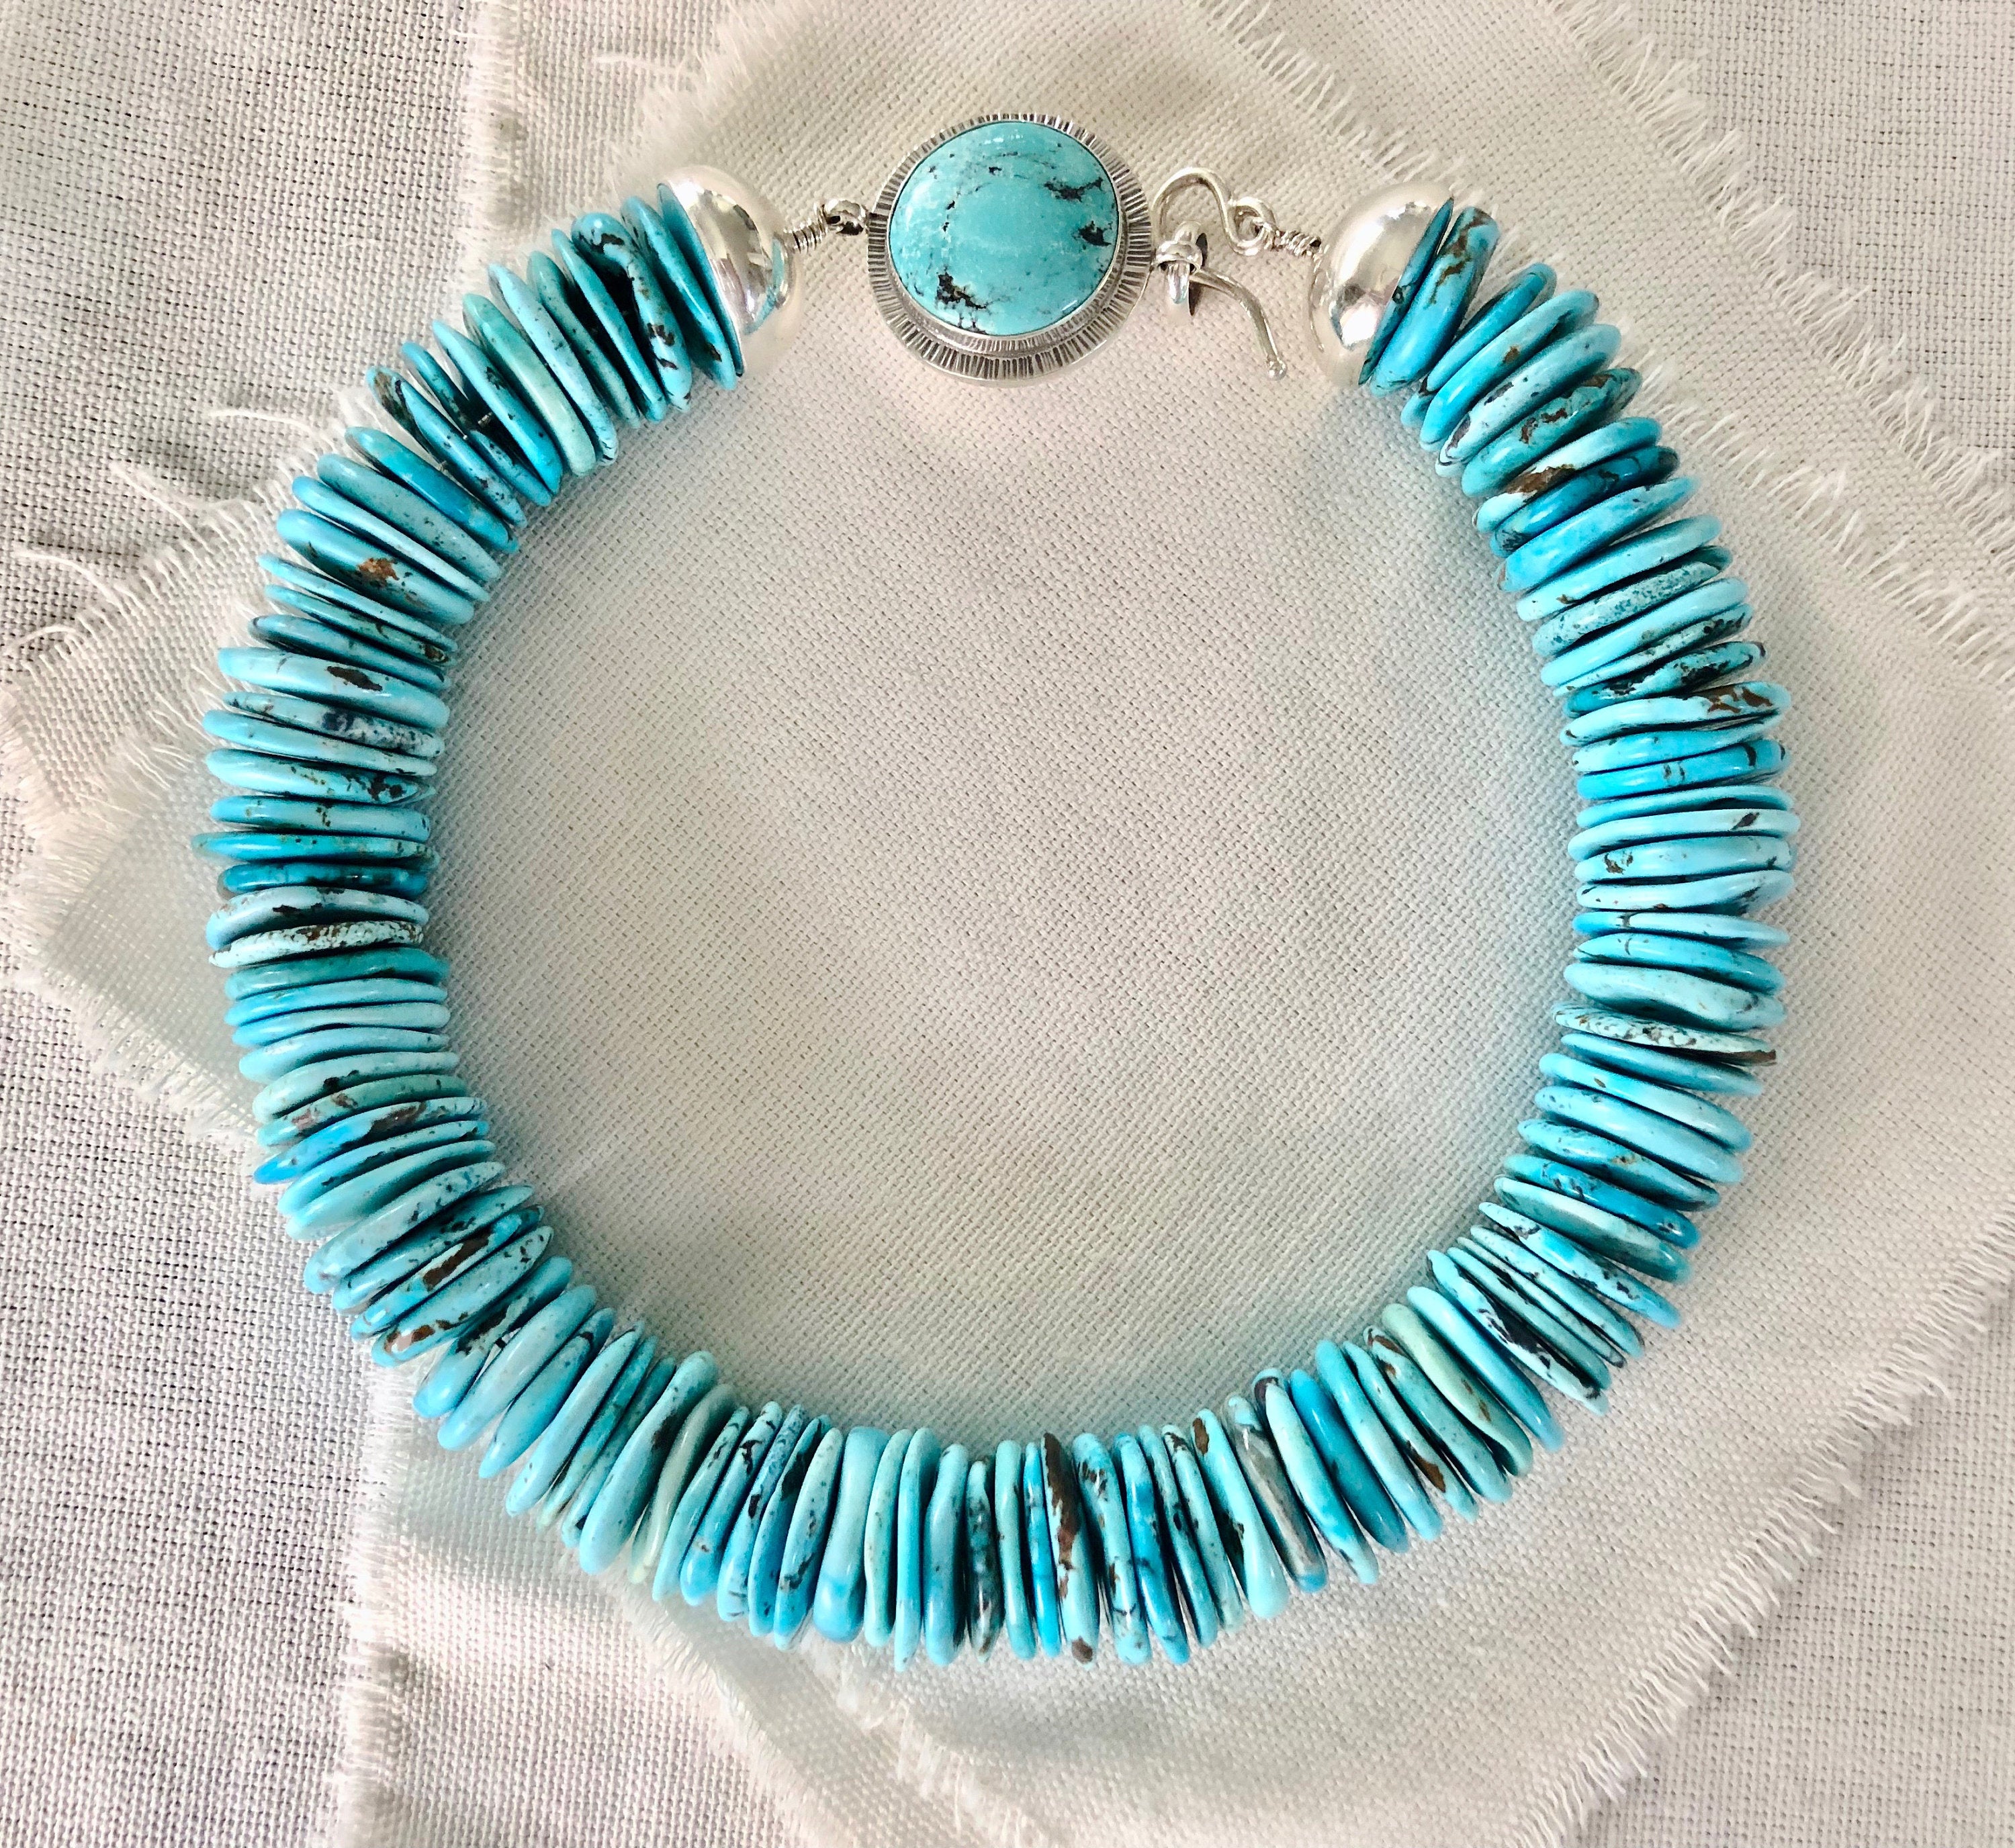 Turquoise Collar Necklace, Turquoise Statement Necklace